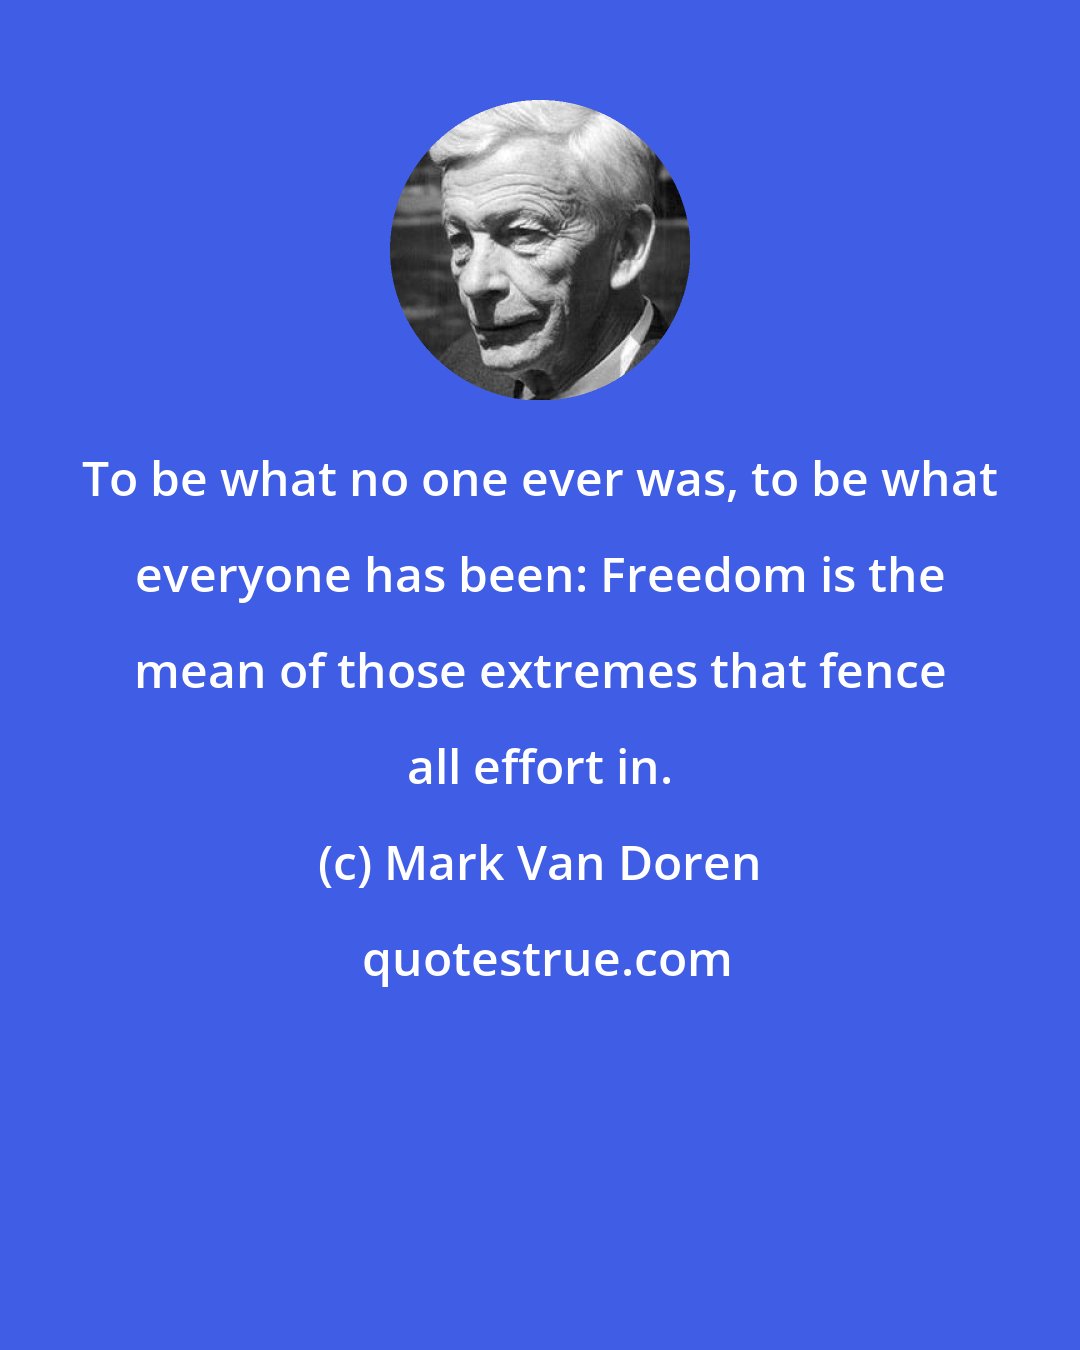 Mark Van Doren: To be what no one ever was, to be what everyone has been: Freedom is the mean of those extremes that fence all effort in.